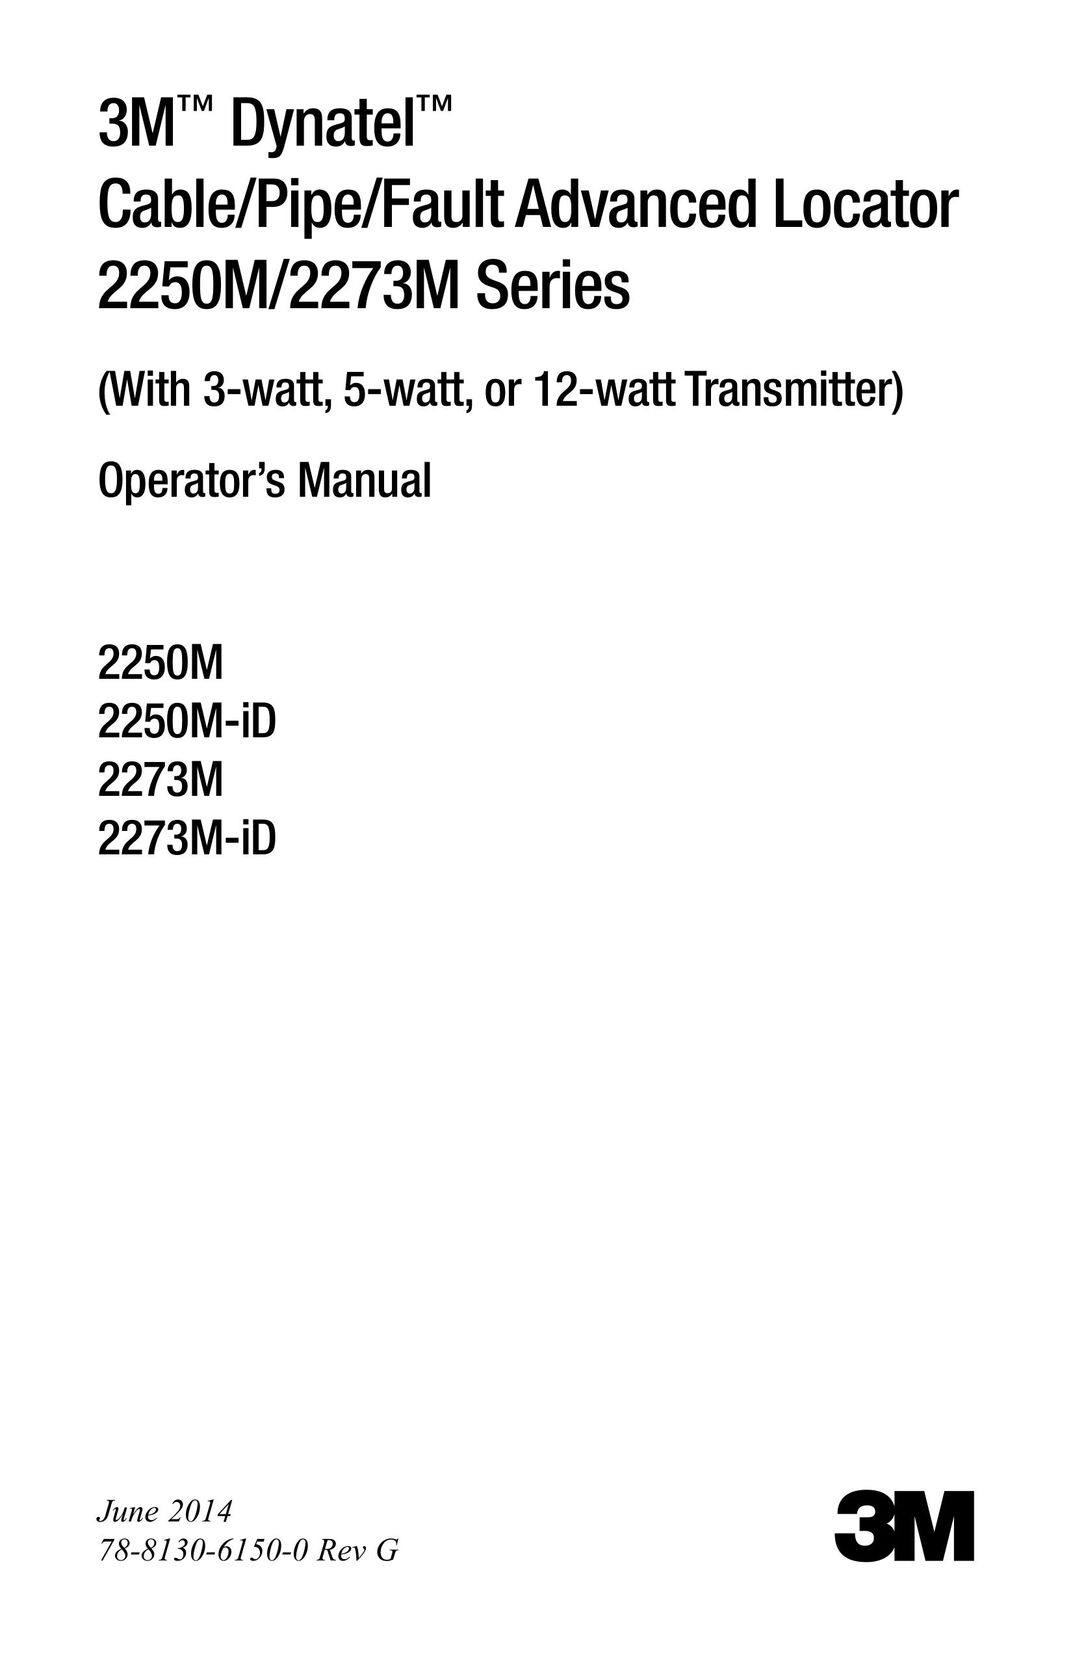 3M 2250M Cable Box User Manual (Page 1)